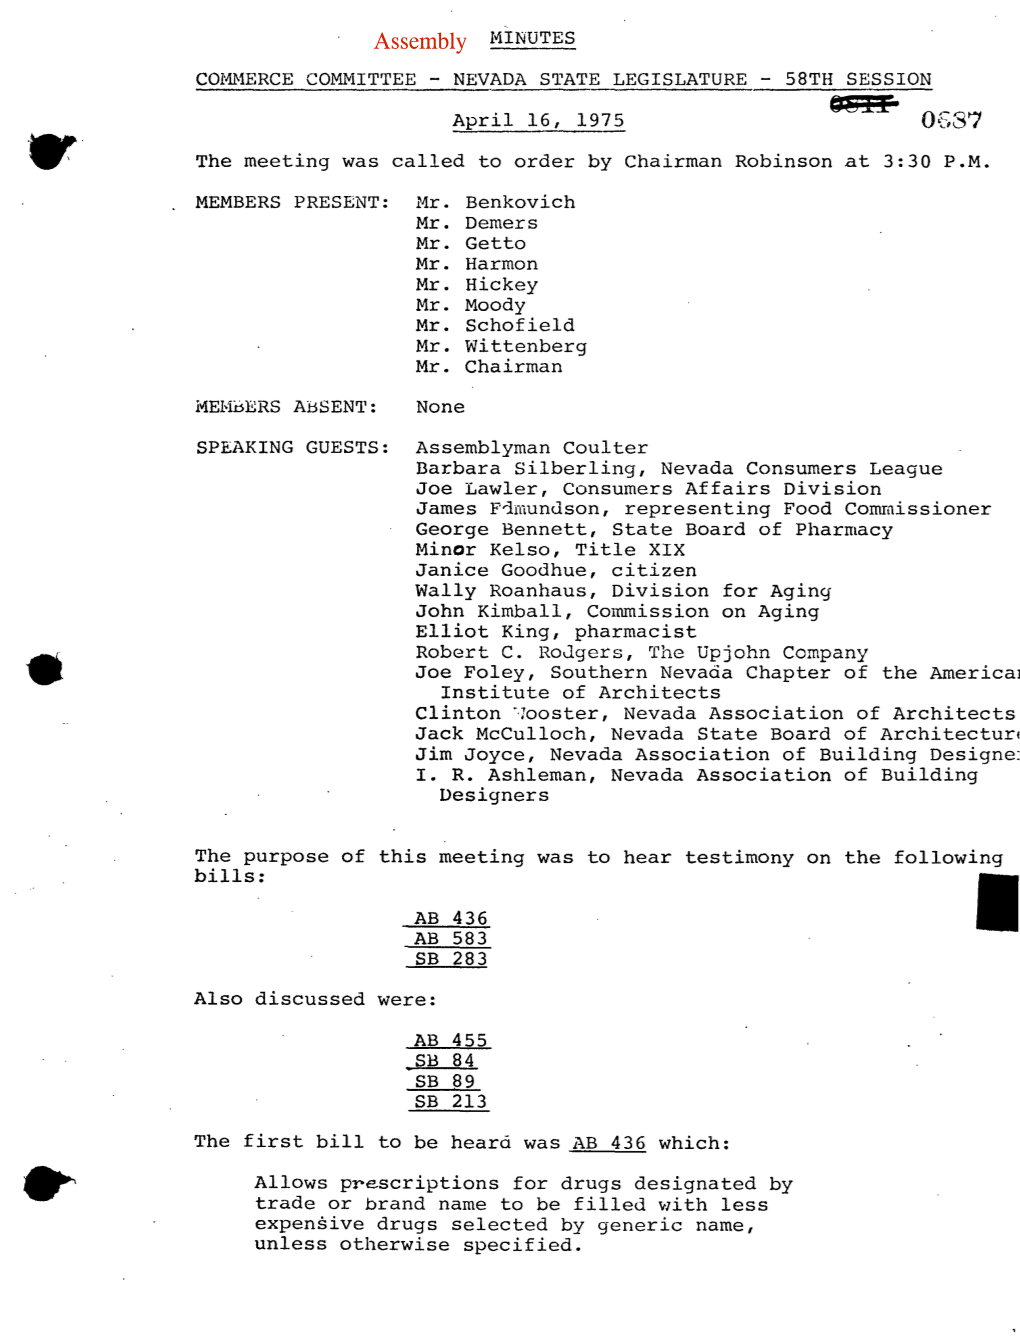 Minutes of the Assembly Committee on Commerce, 4-16-1975